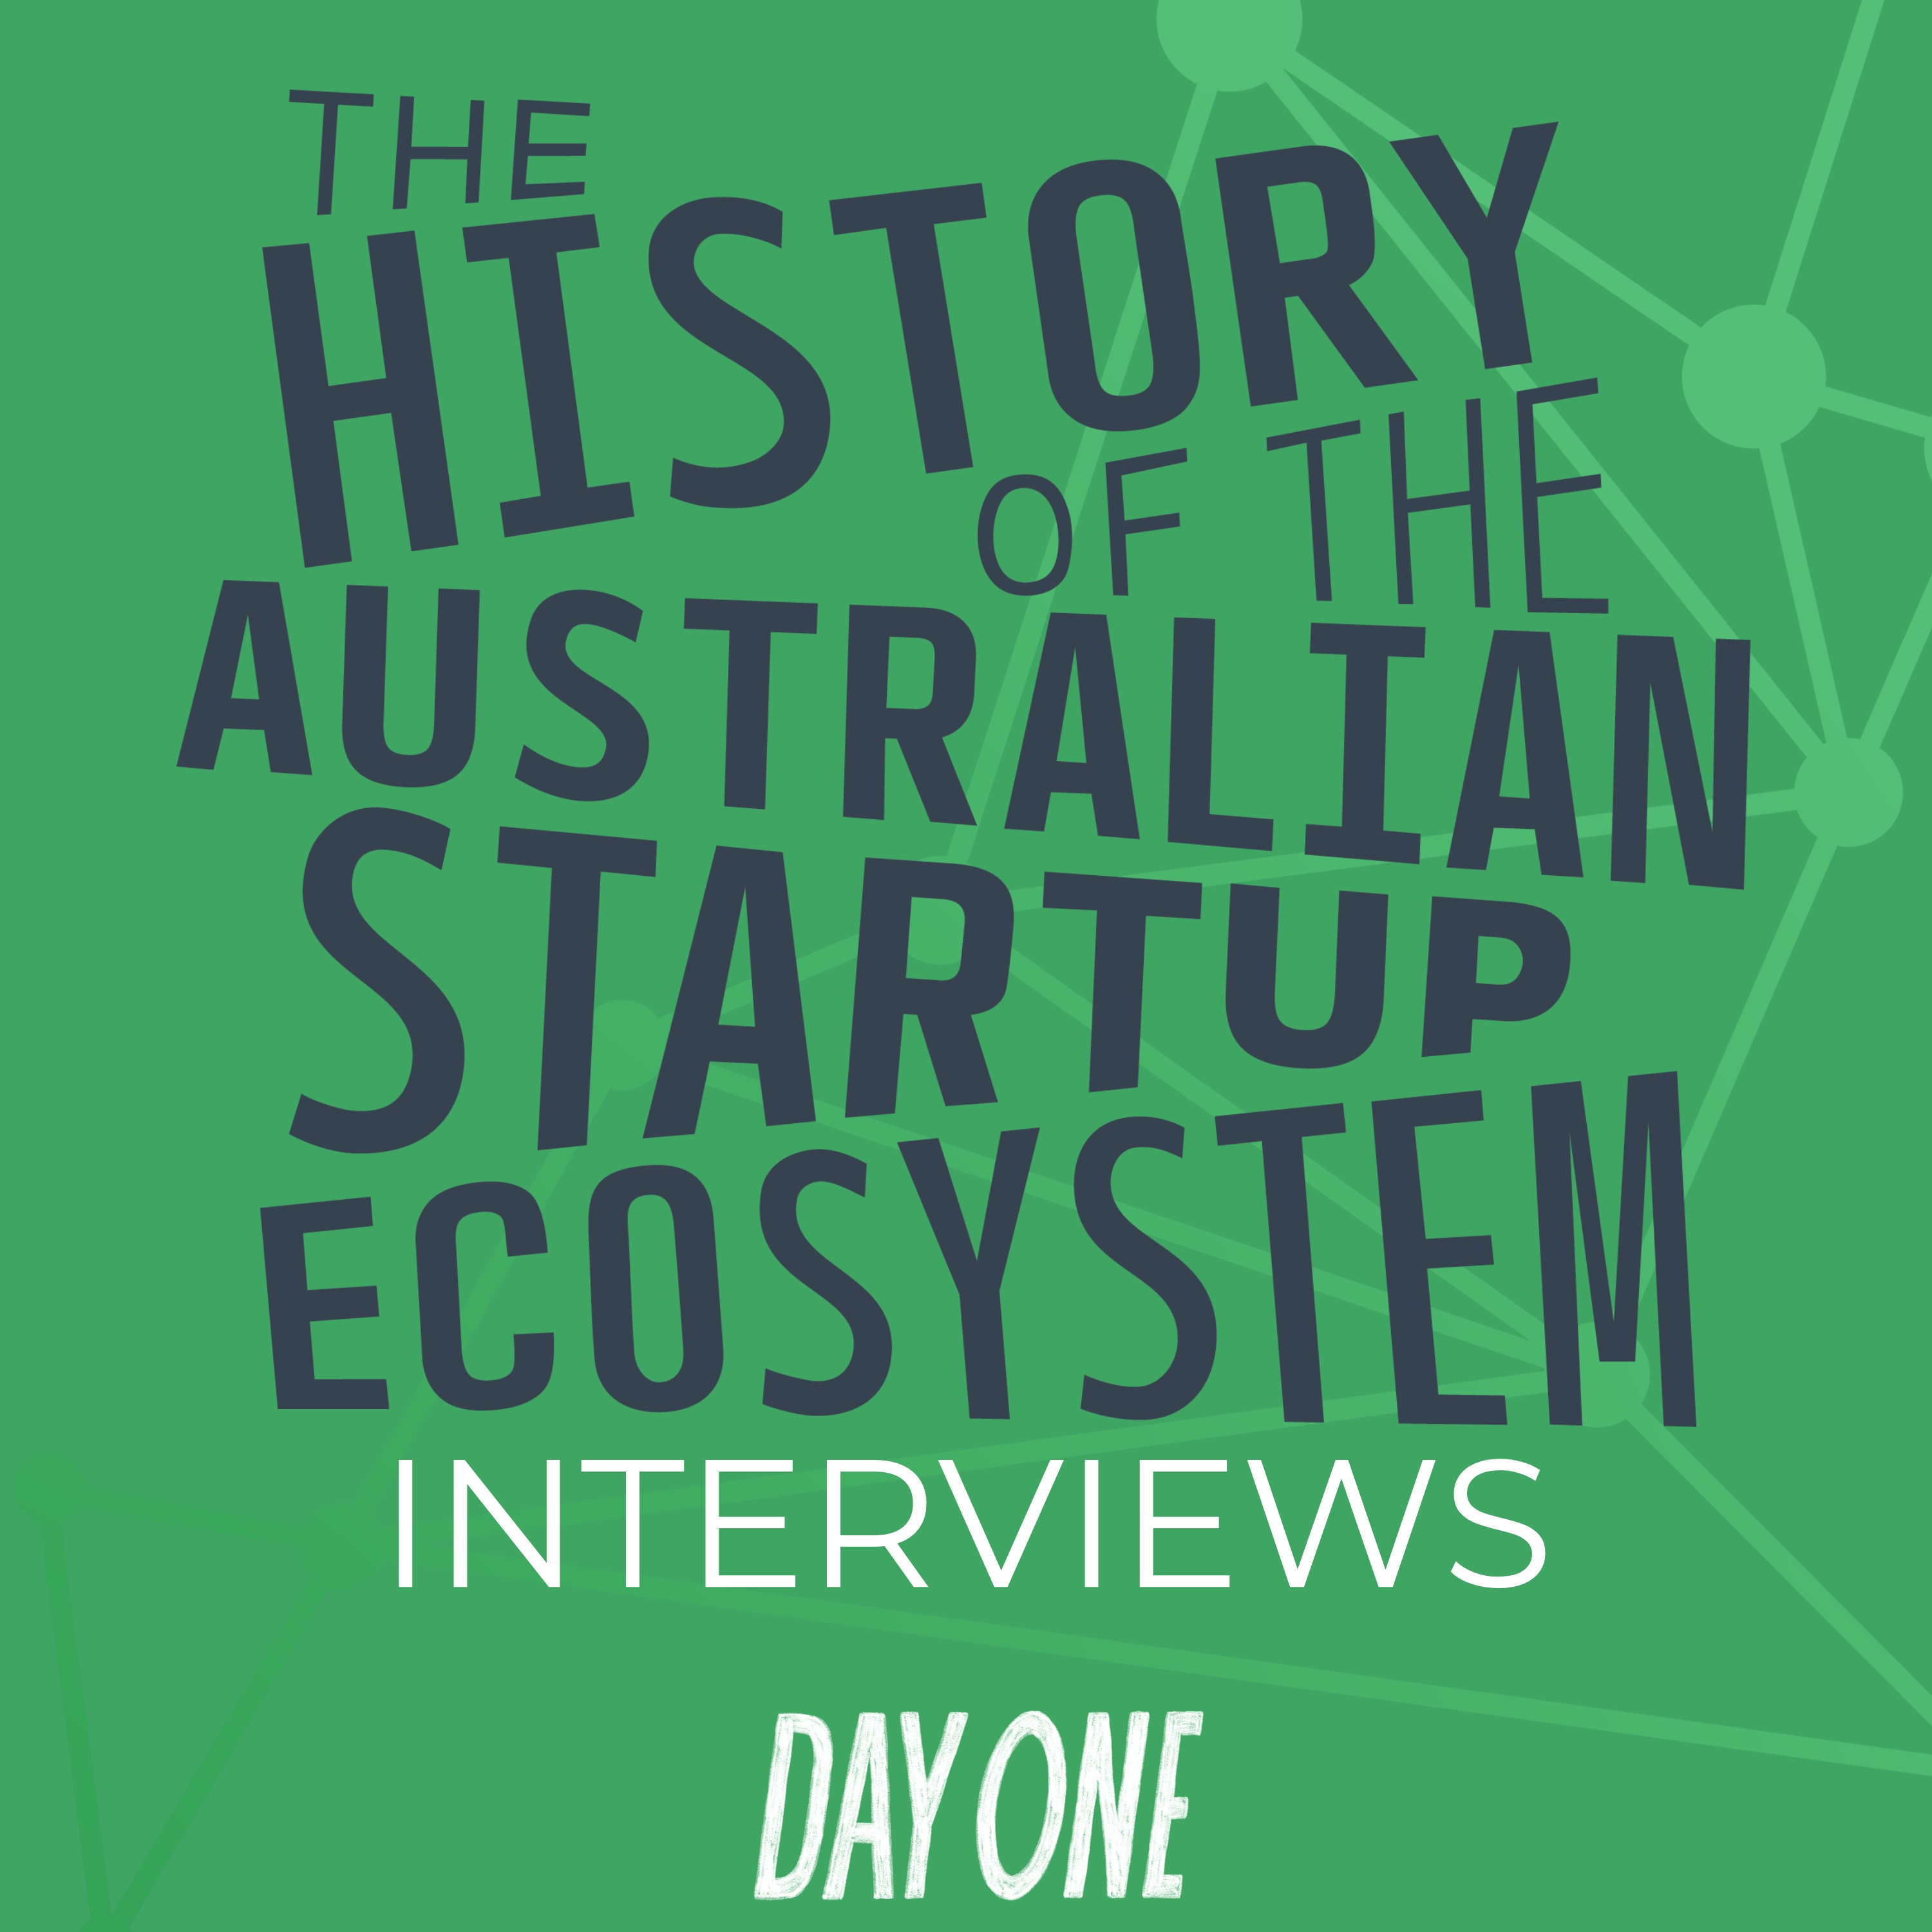 Tim Fung explains why Australia is a great market to test startup ideas